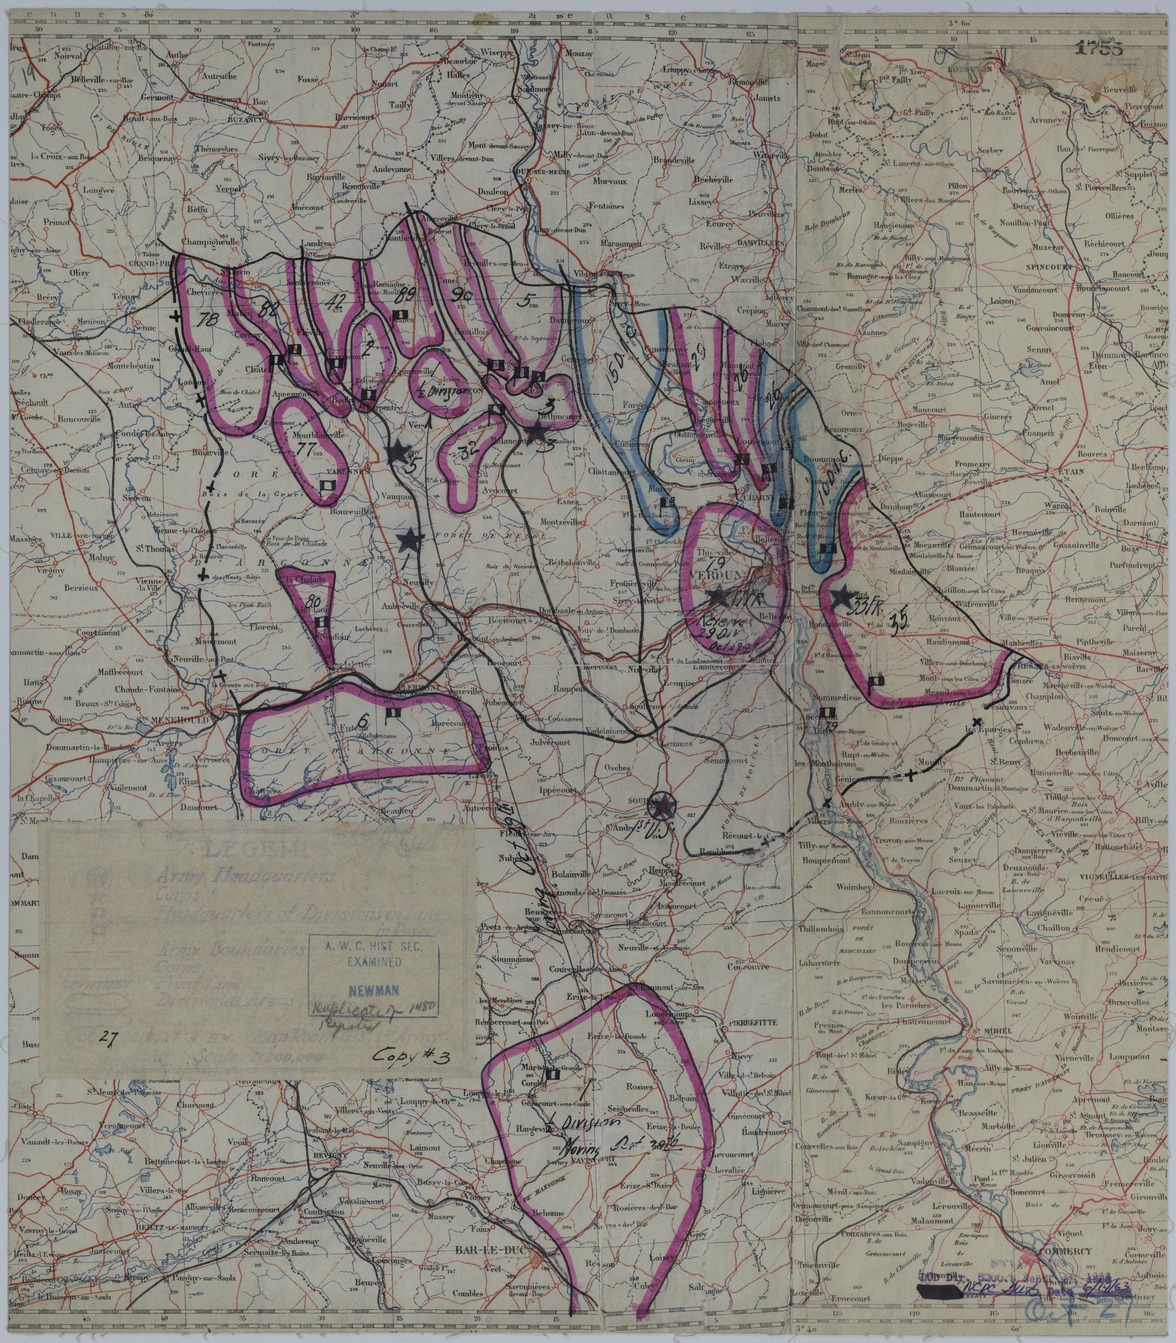 Map of Divisional Positions on October 27, 1918